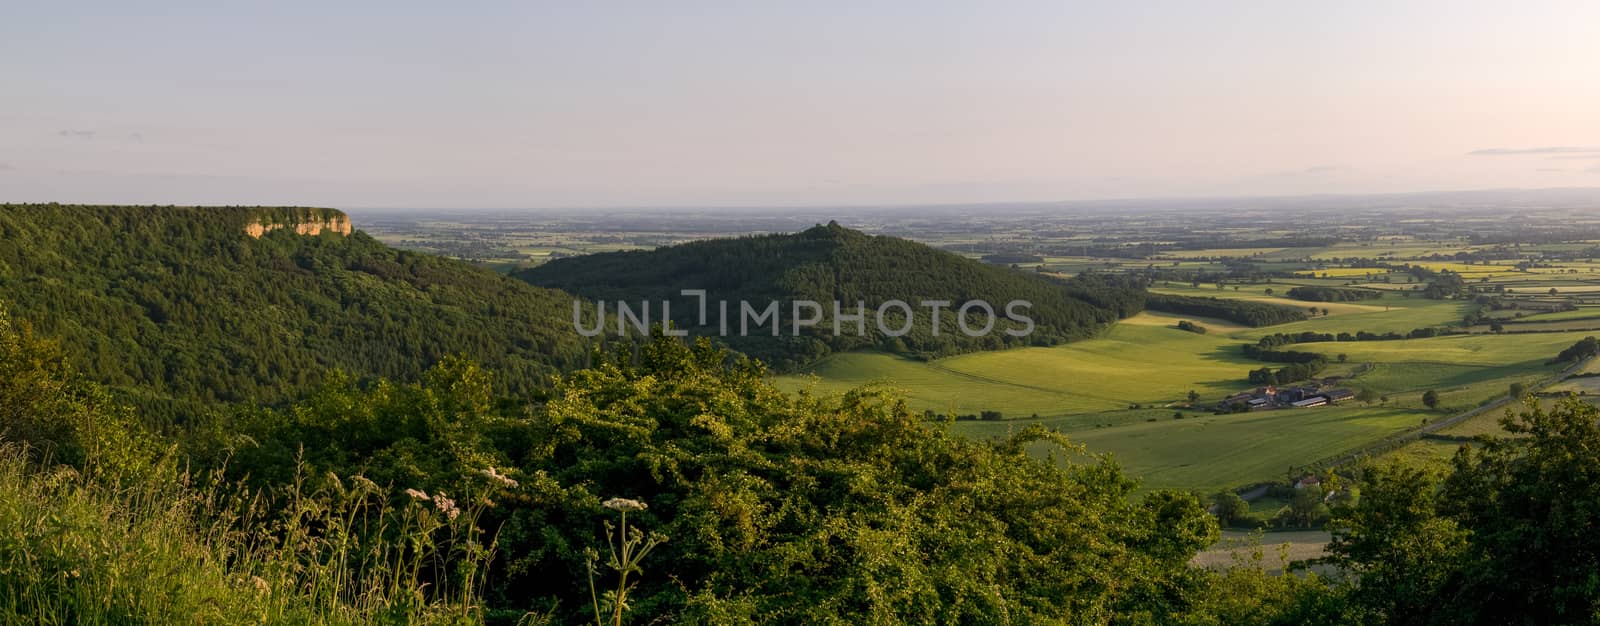 Sutton Bank, also known as Roulston Scar, is a hill in the Hambleton District of North Yorkshire in England